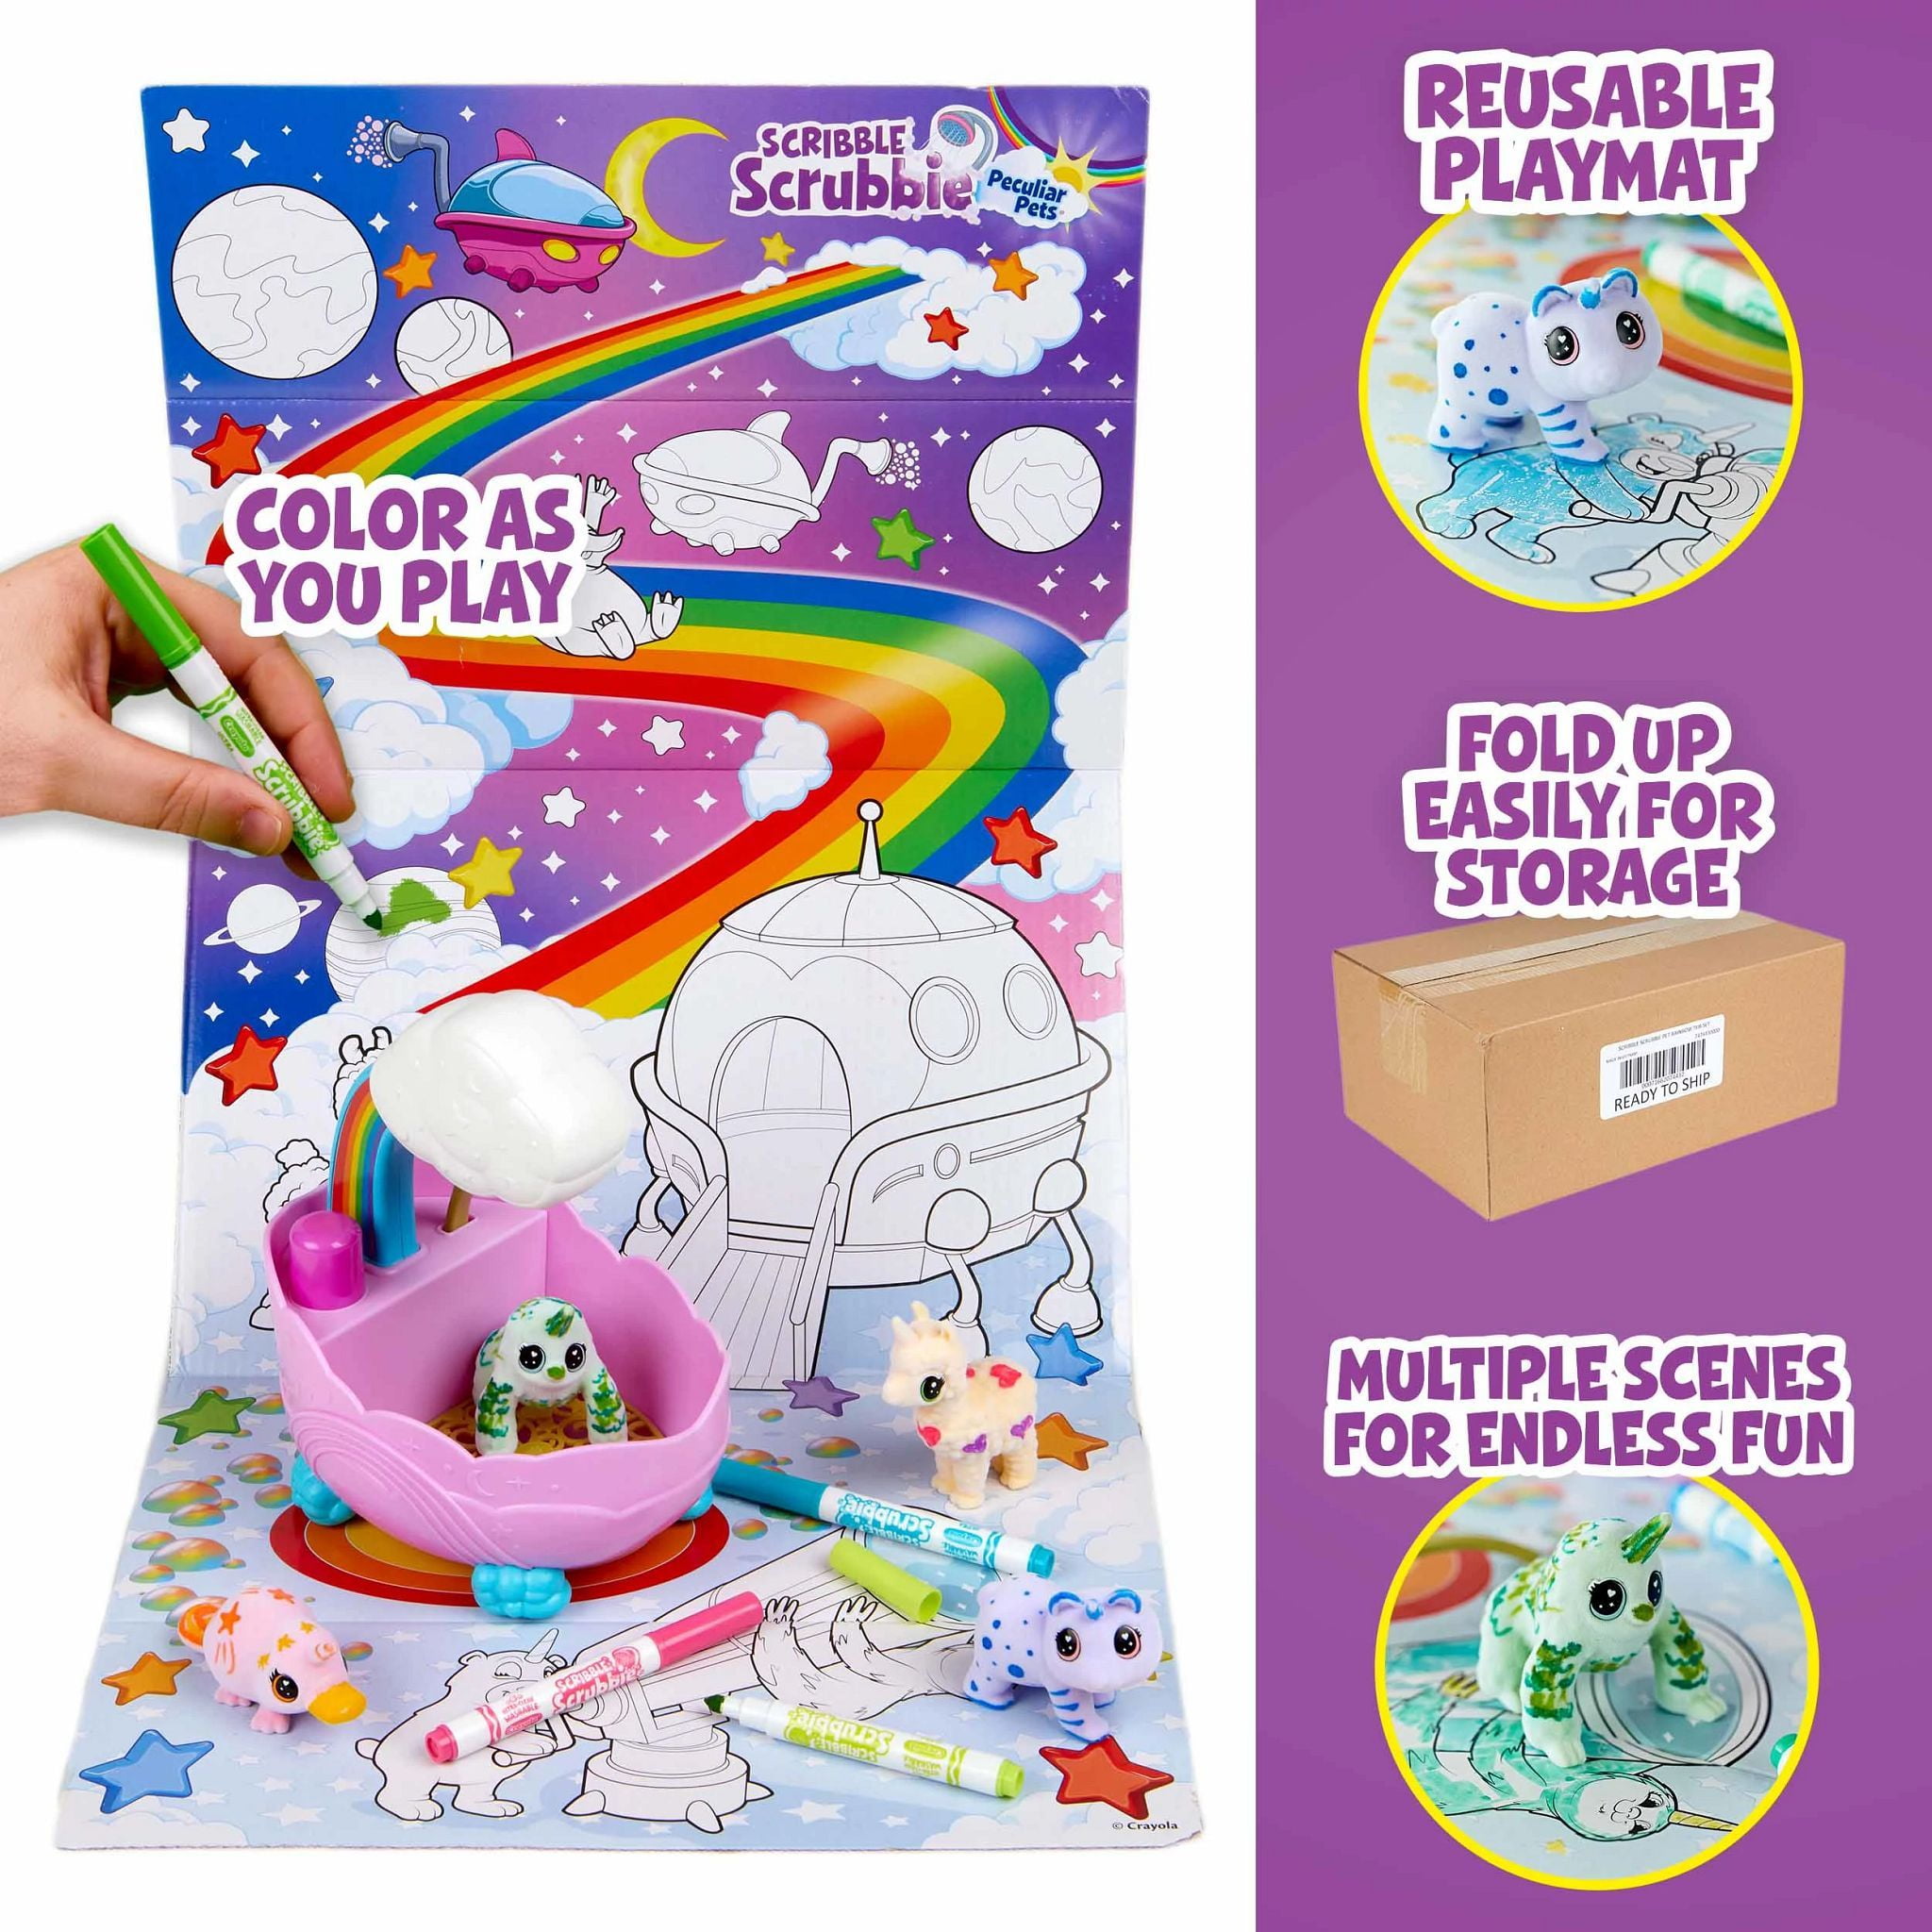 Crayola Scribble Scrubbie Peculiar Zoo, 2daydeliver Exclusive, Kids Toy, Gift For Kids, Ages 3, 4, 5, 6